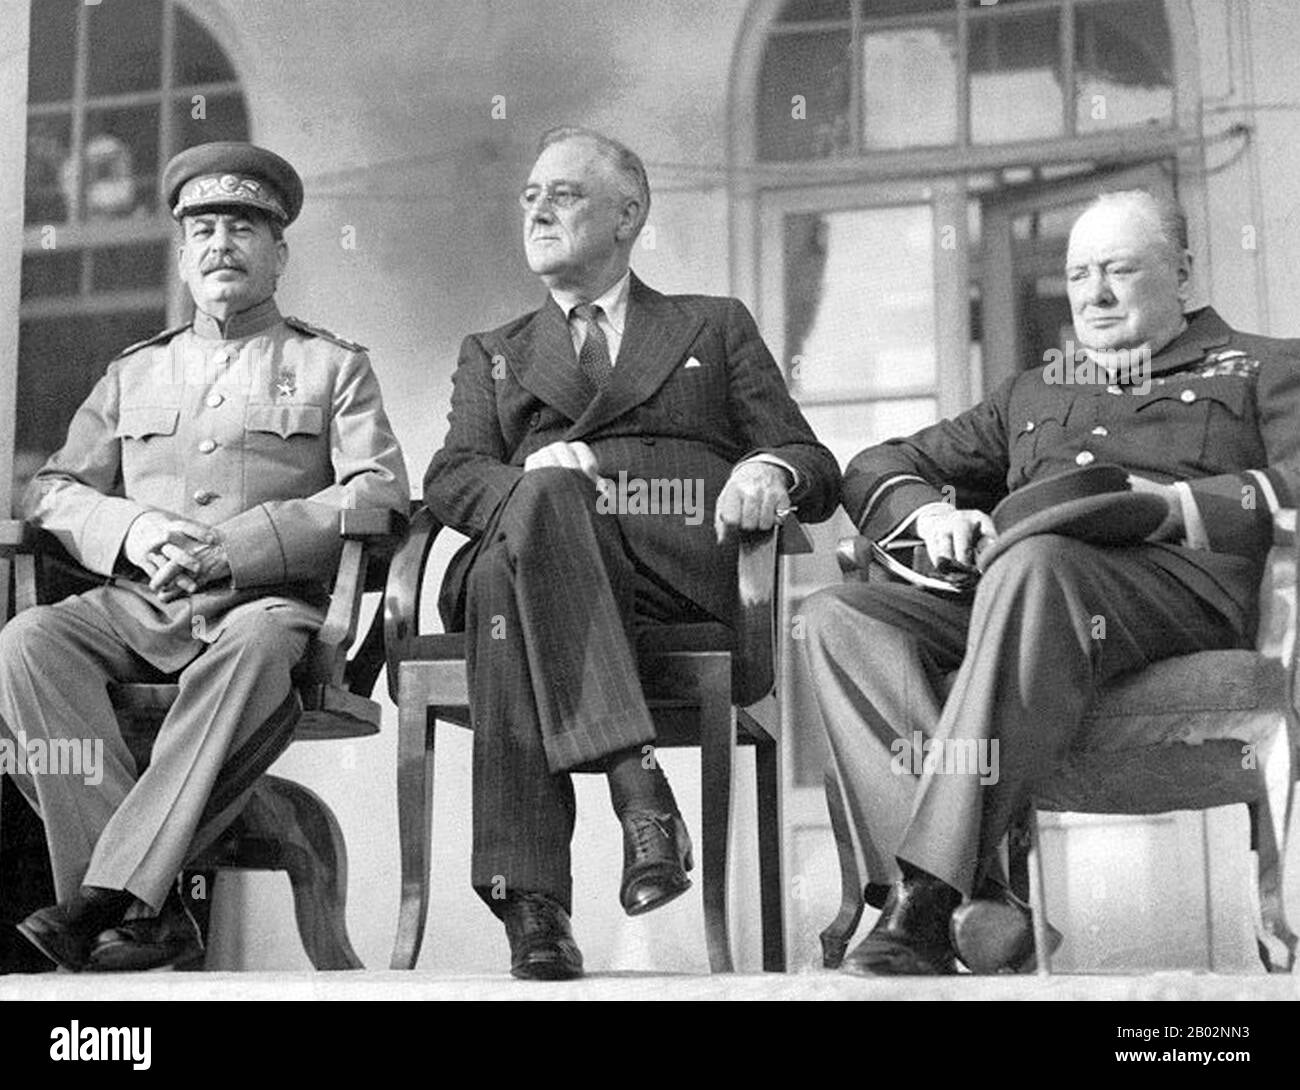 The Tehran Conference was a strategy meeting held between Joseph Stalin, Franklin D. Roosevelt, and Winston Churchill from 28 November to 1 December 1943. It was held in the Soviet Embassy in Tehran, Iran and was the first of the World War II conferences held between all of the 'Big Three' Allied leaders (the Soviet Union, the United States, and the United Kingdom).  It closely followed the Cairo Conference which had taken place on 22-26 November 1943, and preceded the 1945 Yalta and Potsdam Conferences. Although all three of the leaders present arrived with differing objectives, the main outc Stock Photo